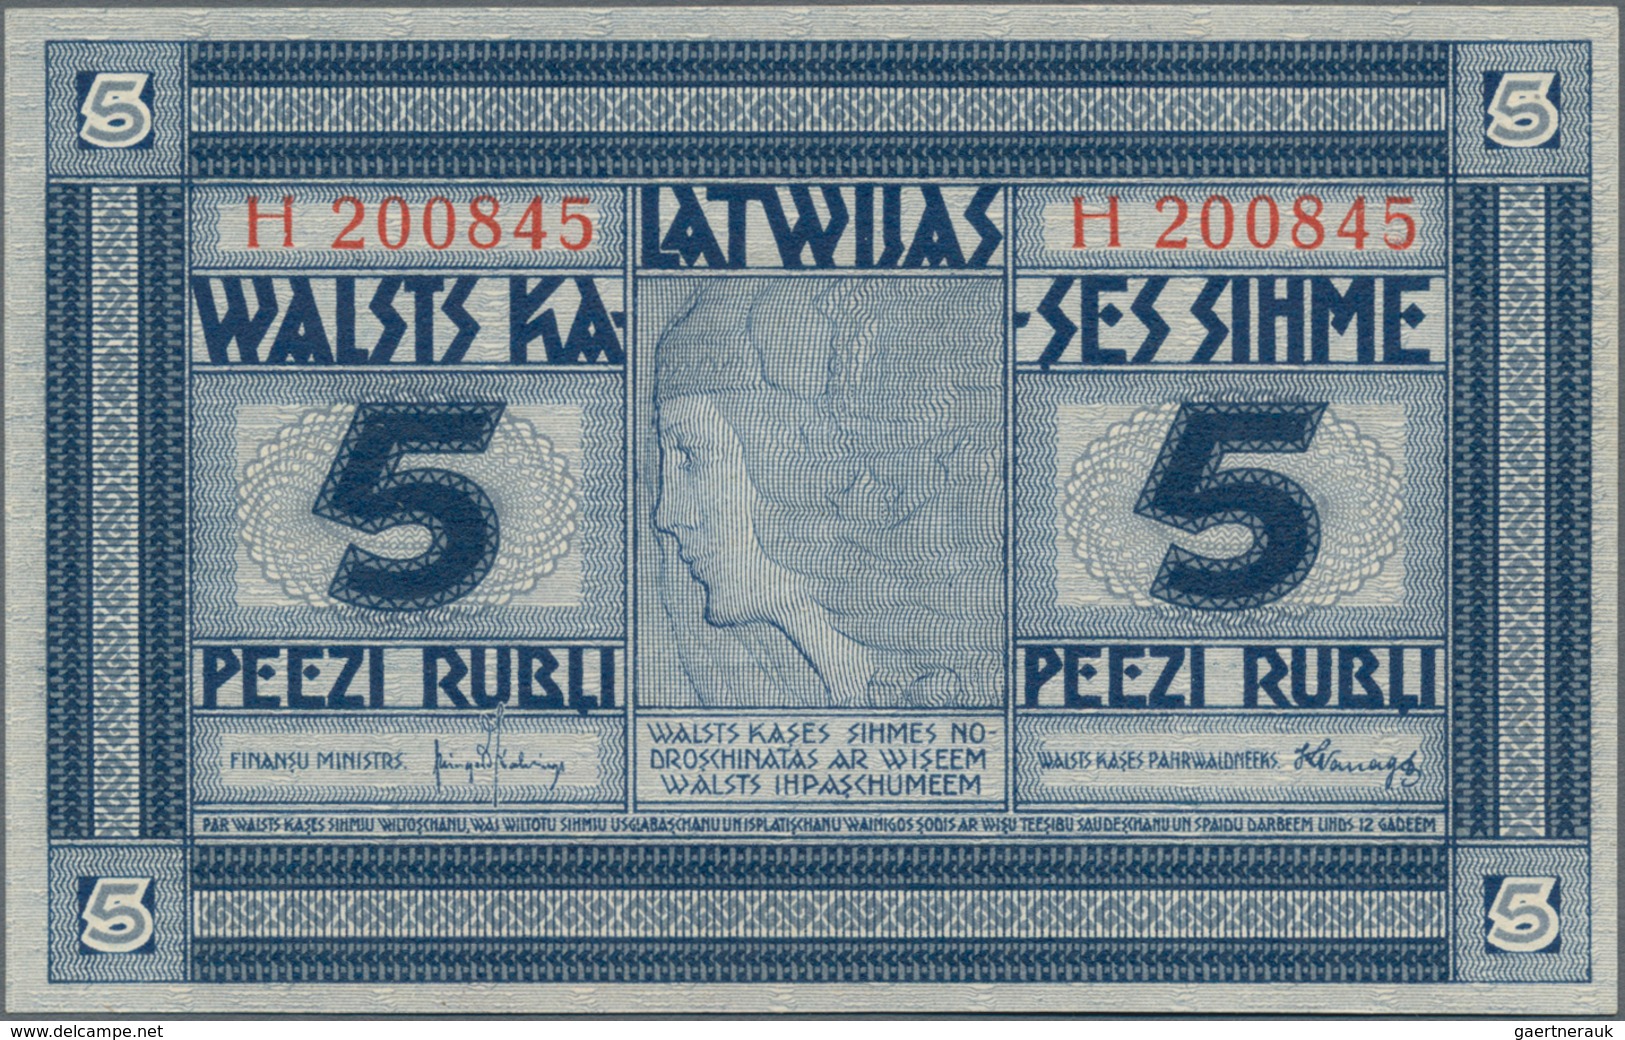 Latvia / Lettland: Highly rare set with 16 banknotes Latvia and Lithuania comprising 50 Centu 1922,